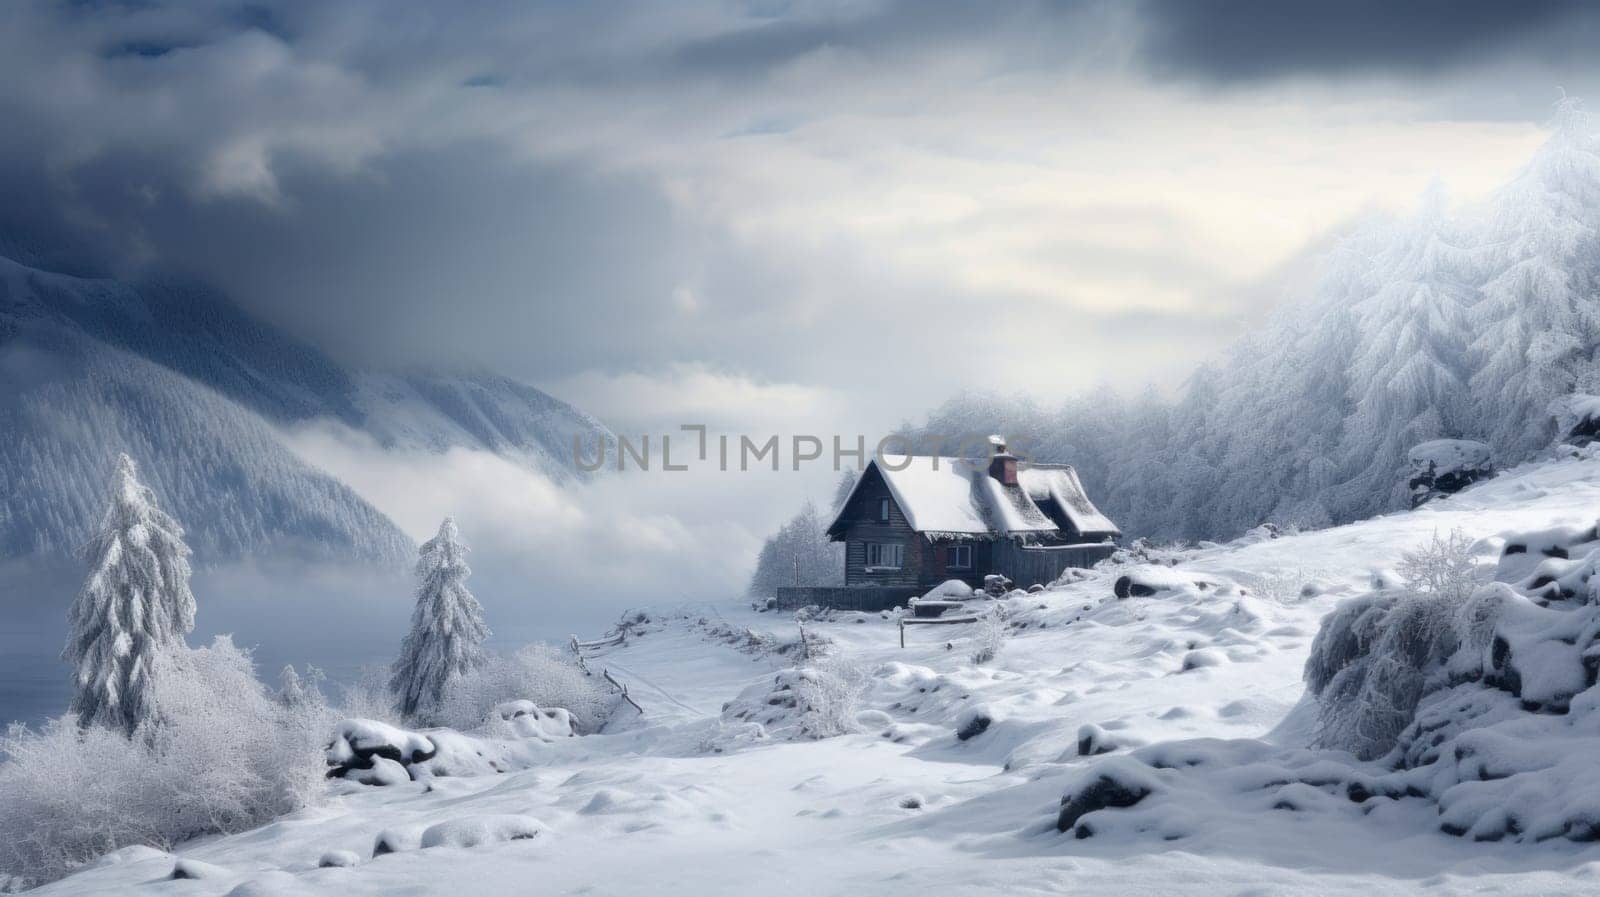 Picturesque, beautiful winter landscape of mountains and forest, snow-covered valley with a small house for privacy. Concept of traveling around the world, recreation, winter sports, vacations, tourism in the mountains and unusual places.